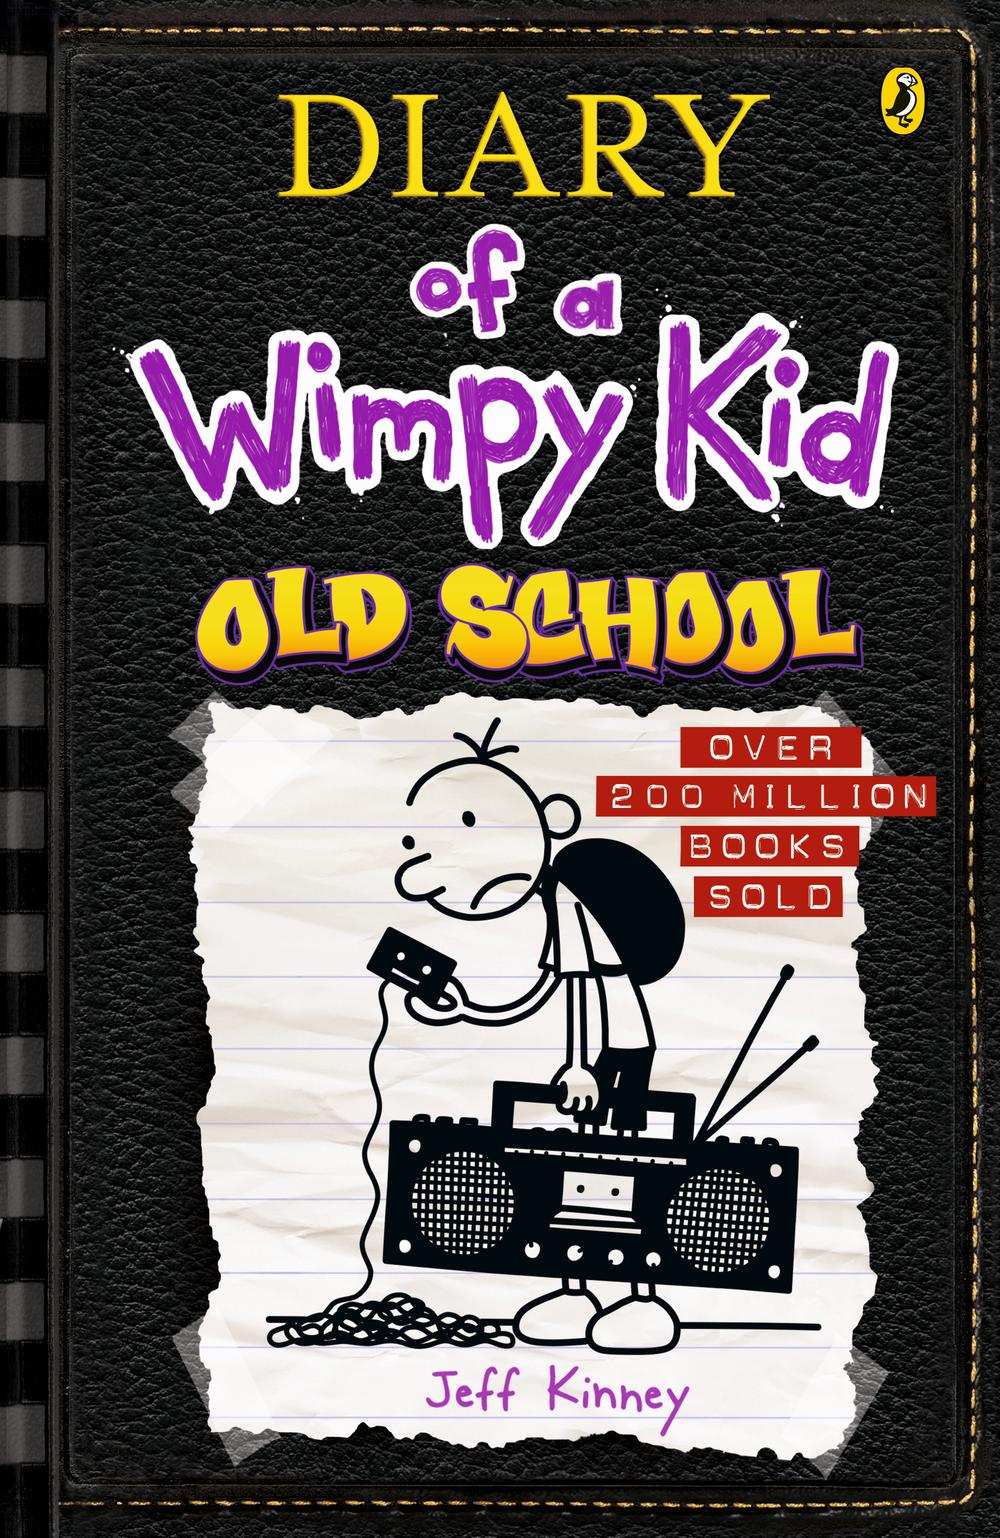 Diary of a Wimpy Kid Old School (Book 10) by Jeff Kinney, Paperback